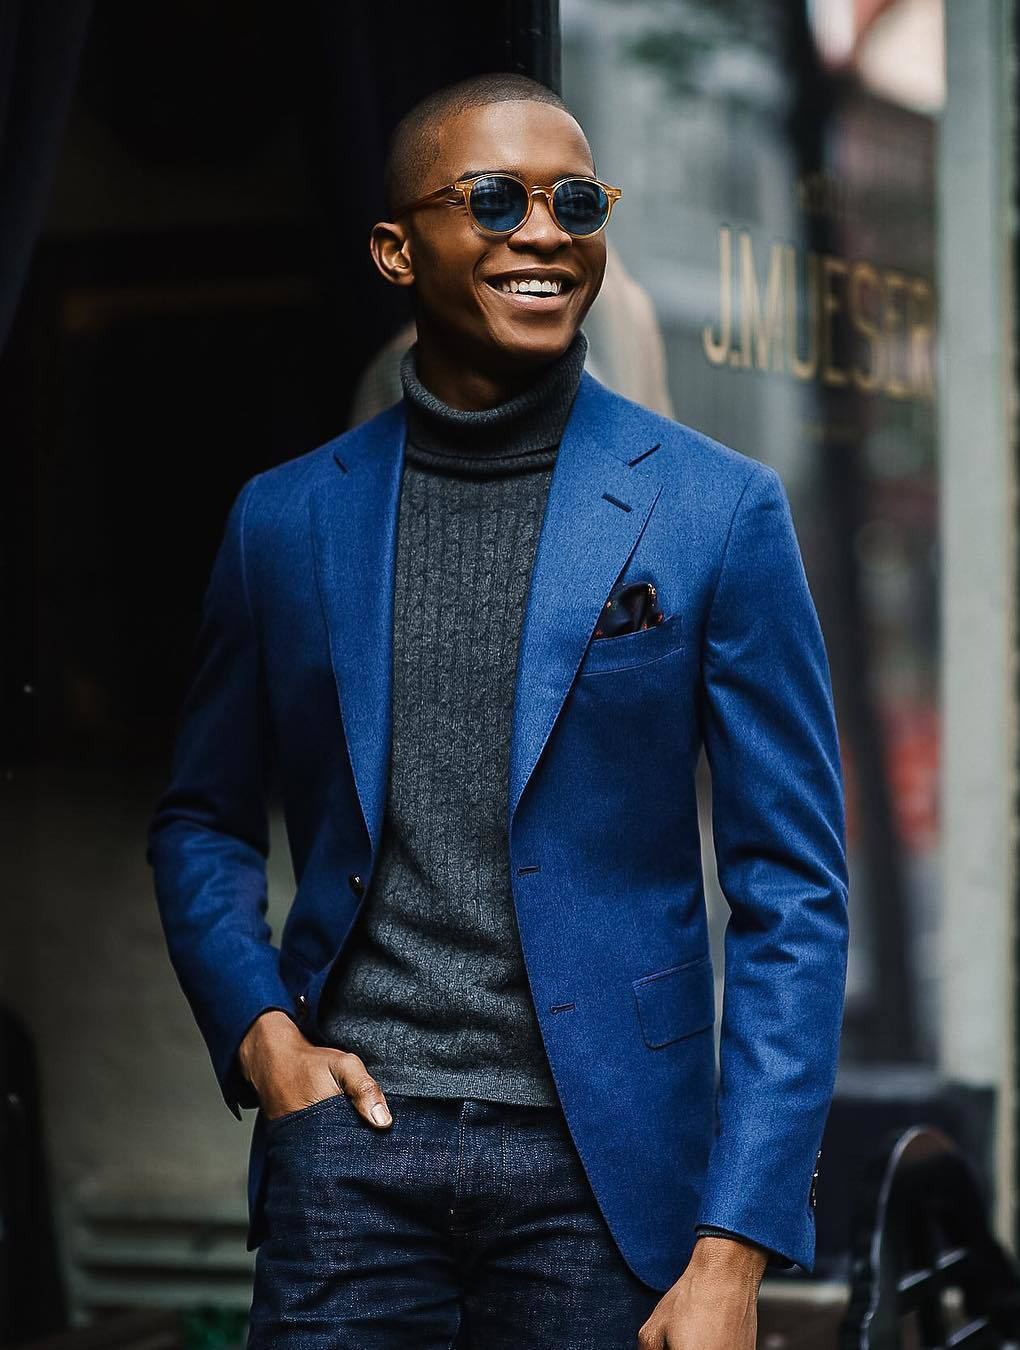 Matching a blue suit jacket, grey turtleneck, and dark blue jeans